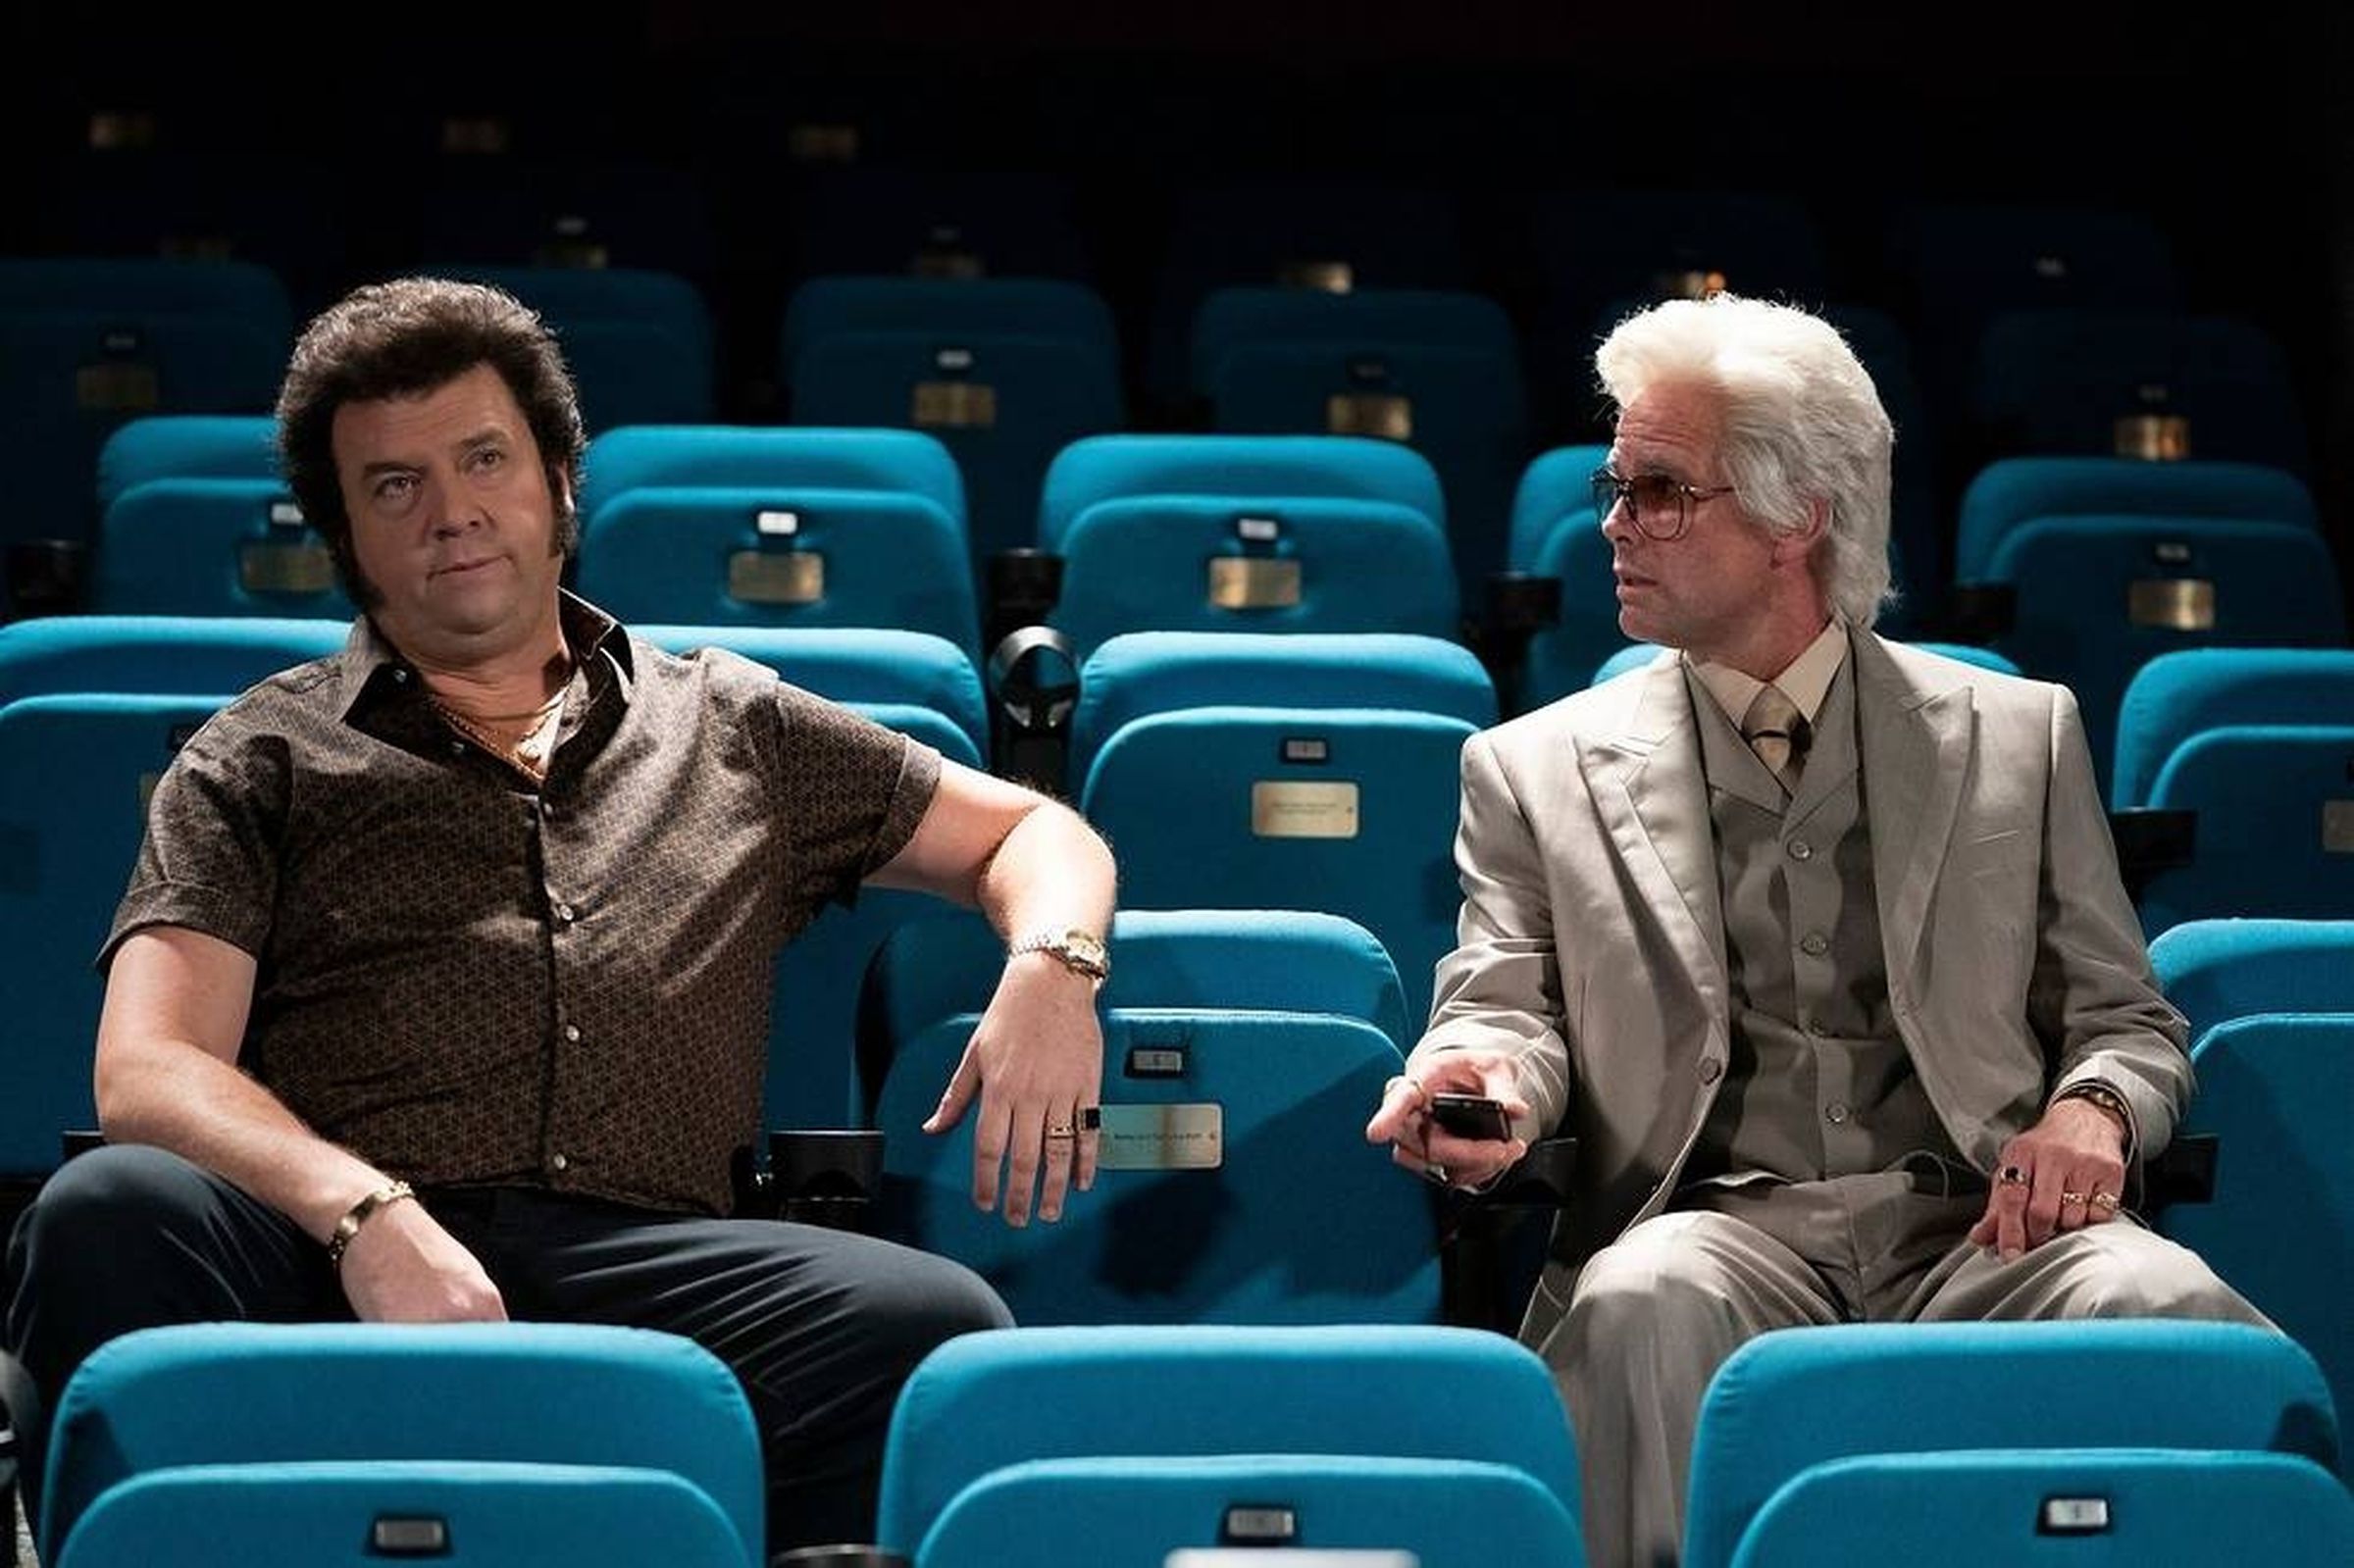 Screenshot from Max show The Righteous Gemstones featuring Danny McBride (left) as Jesse Gemstone and Walton Goggins (right) as Uncle Baby Billy.